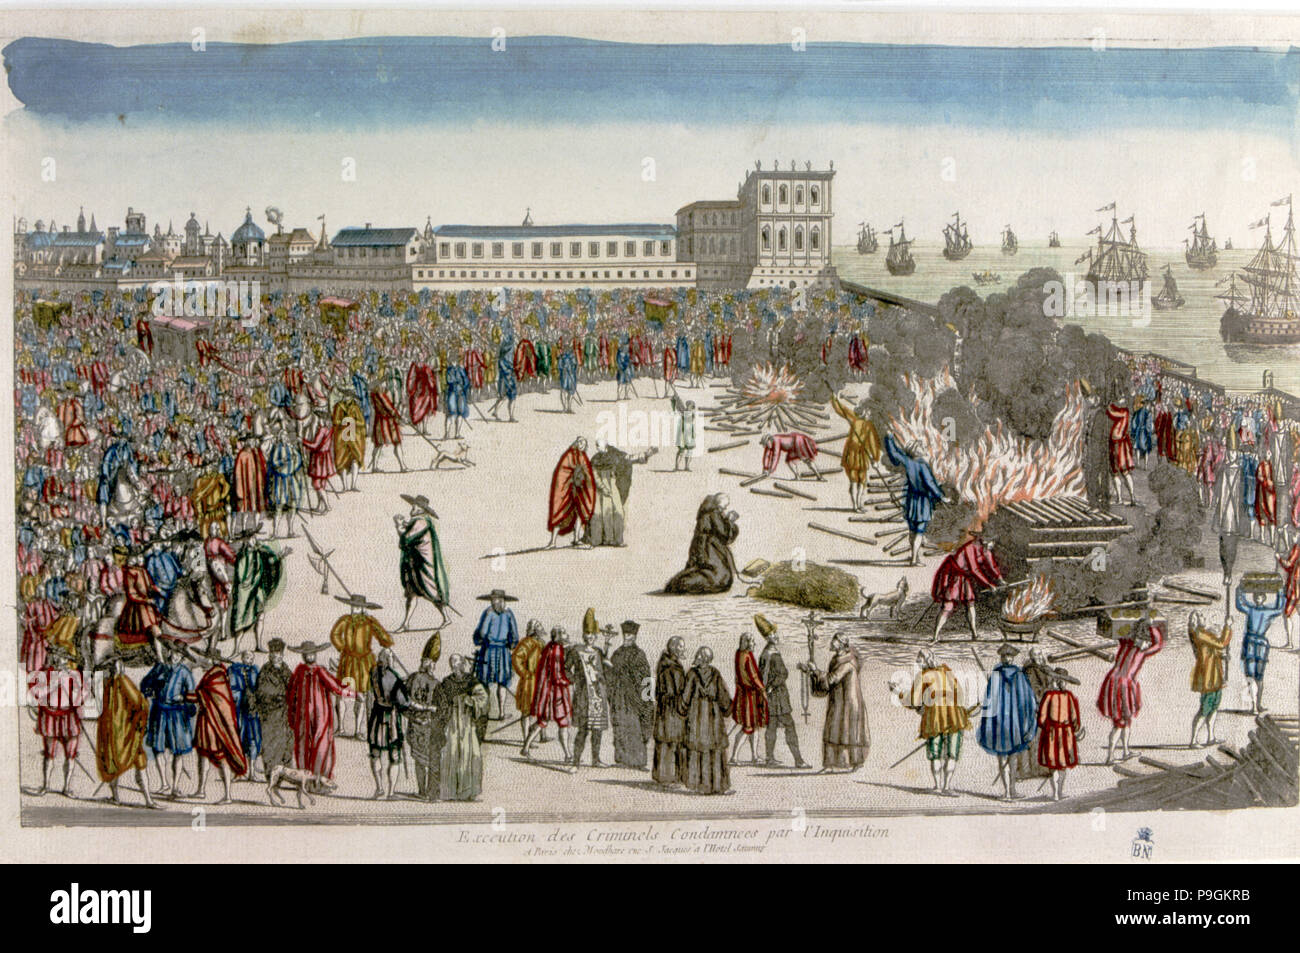 Square with the audience watching an execution 'The quemadero', colored engraving. Stock Photo